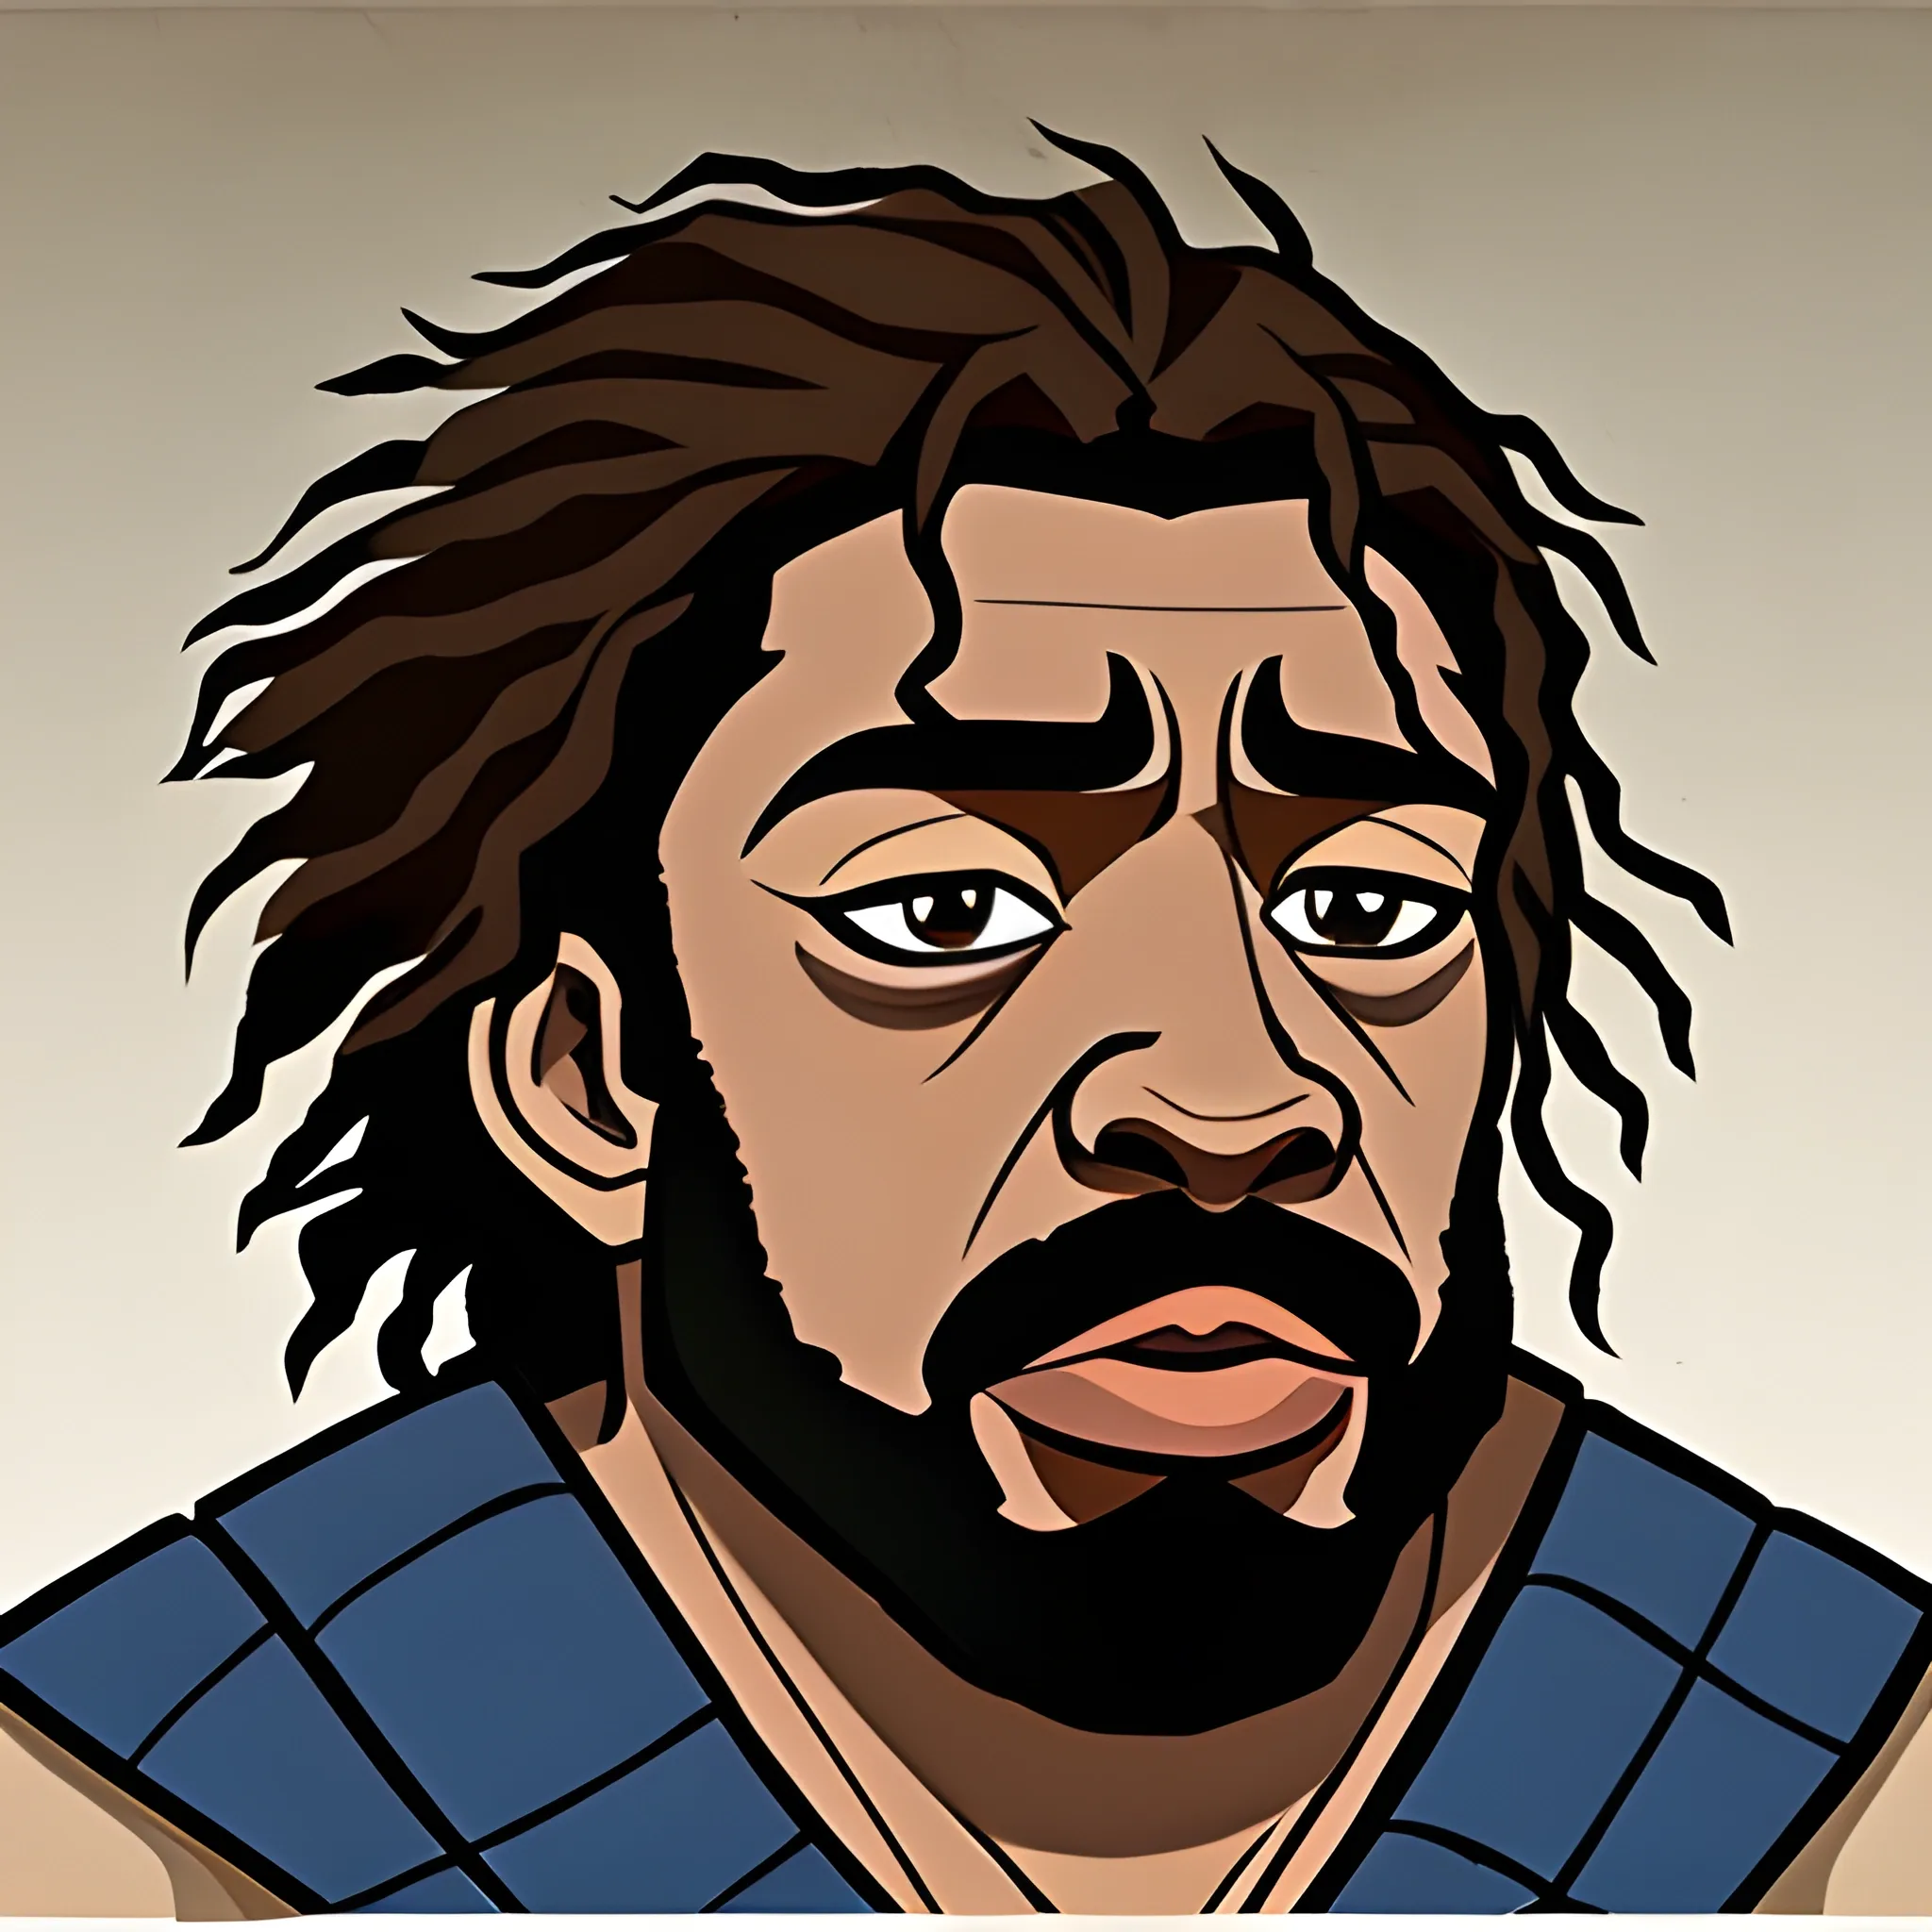 William wallace from Braveheart movie as an African American, Cartoon